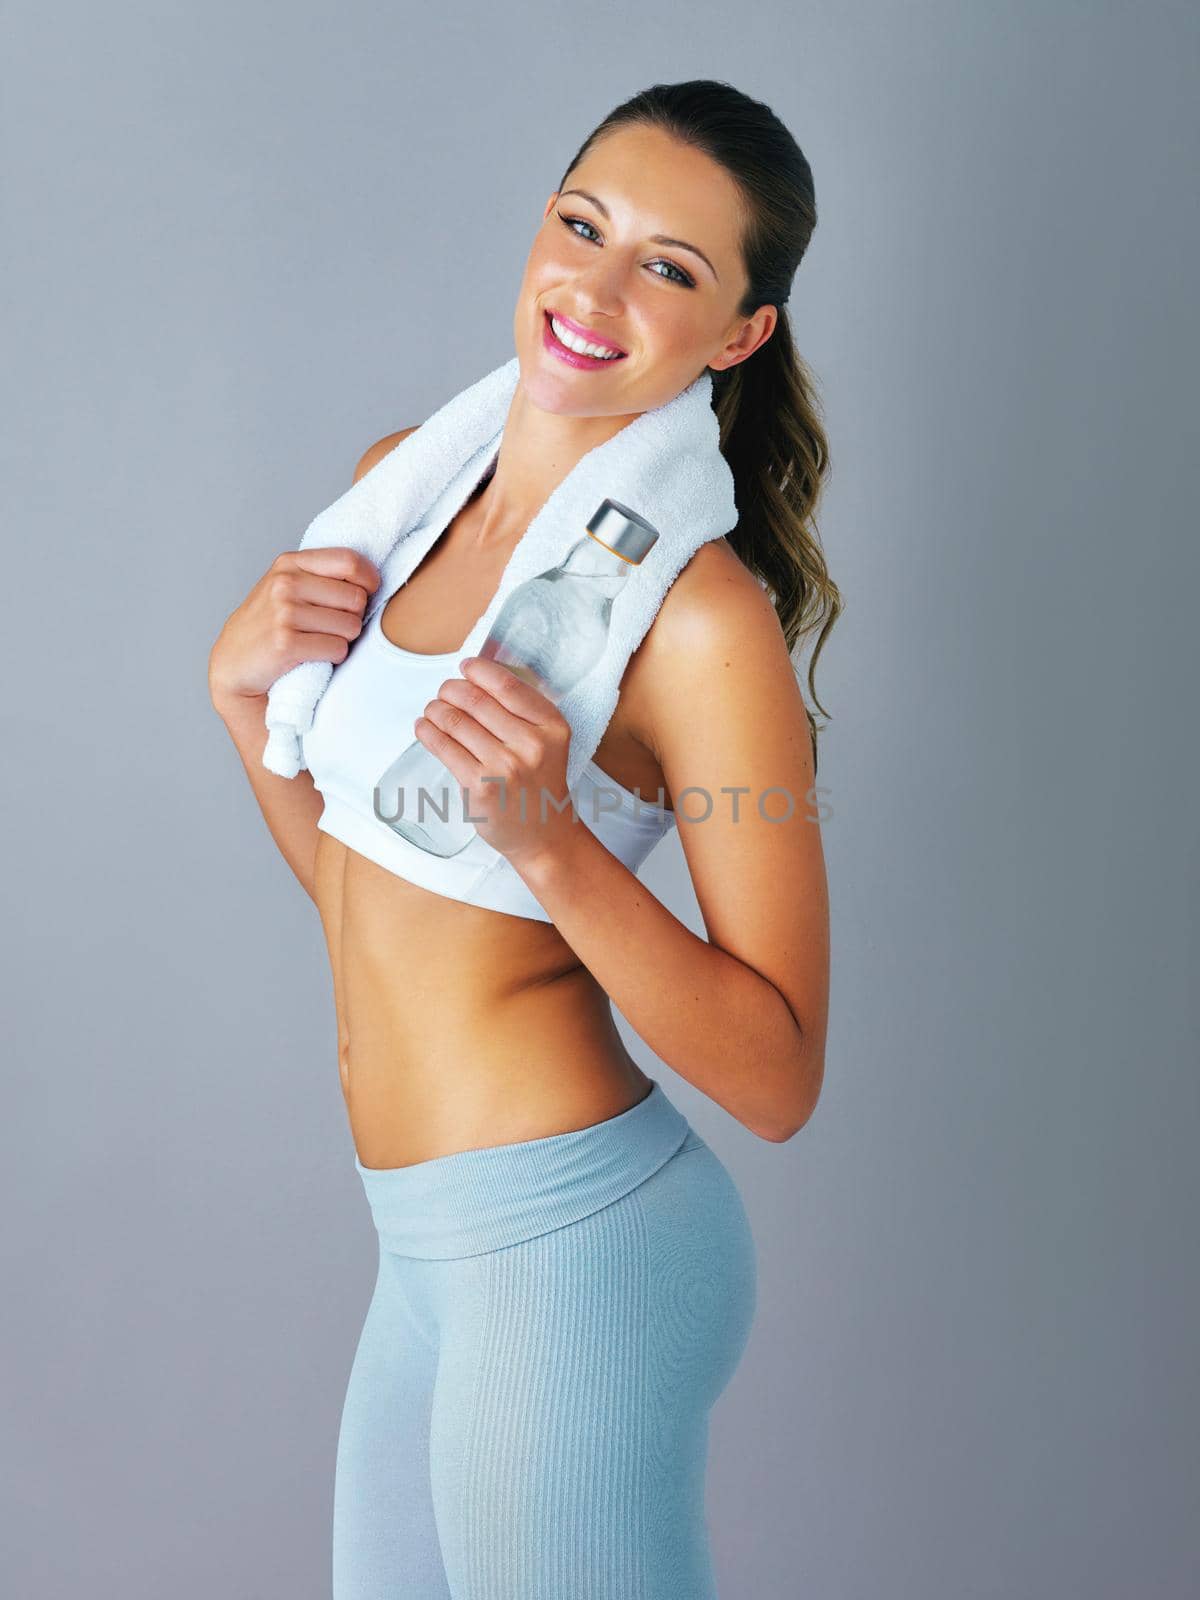 Fit as a fiddle. Cropped portrait of an attractive and sporty young woman holding a water bottle against a grey background